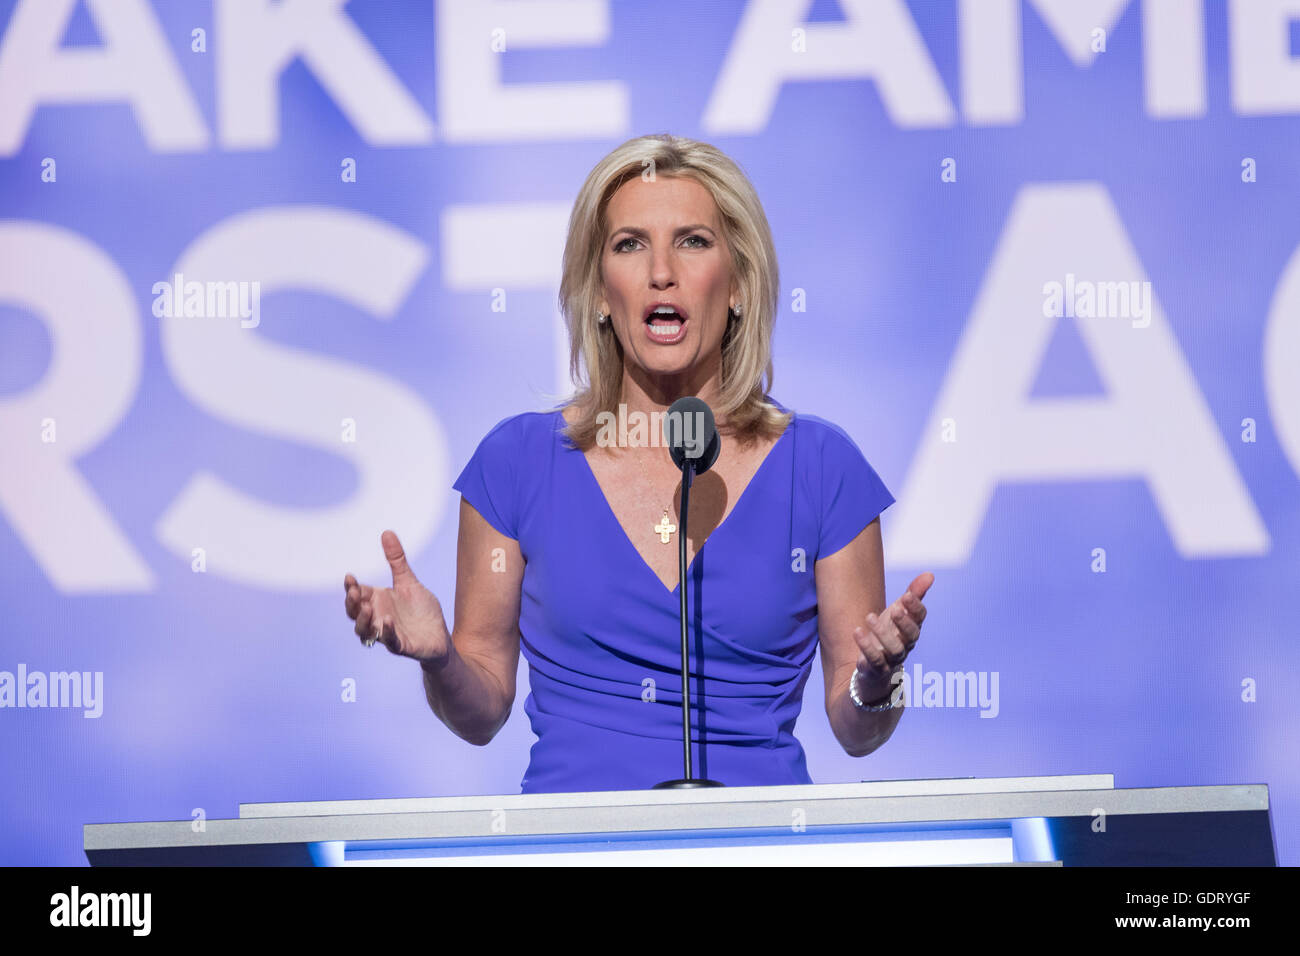 Cleveland, Ohio, USA. 20th July, 2016. Conservative Talk show personality Laura Ingraham addresses the third day of the Republican National Convention July 20, 2016 in Cleveland, Ohio. Credit:  Planetpix/Alamy Live News Stock Photo